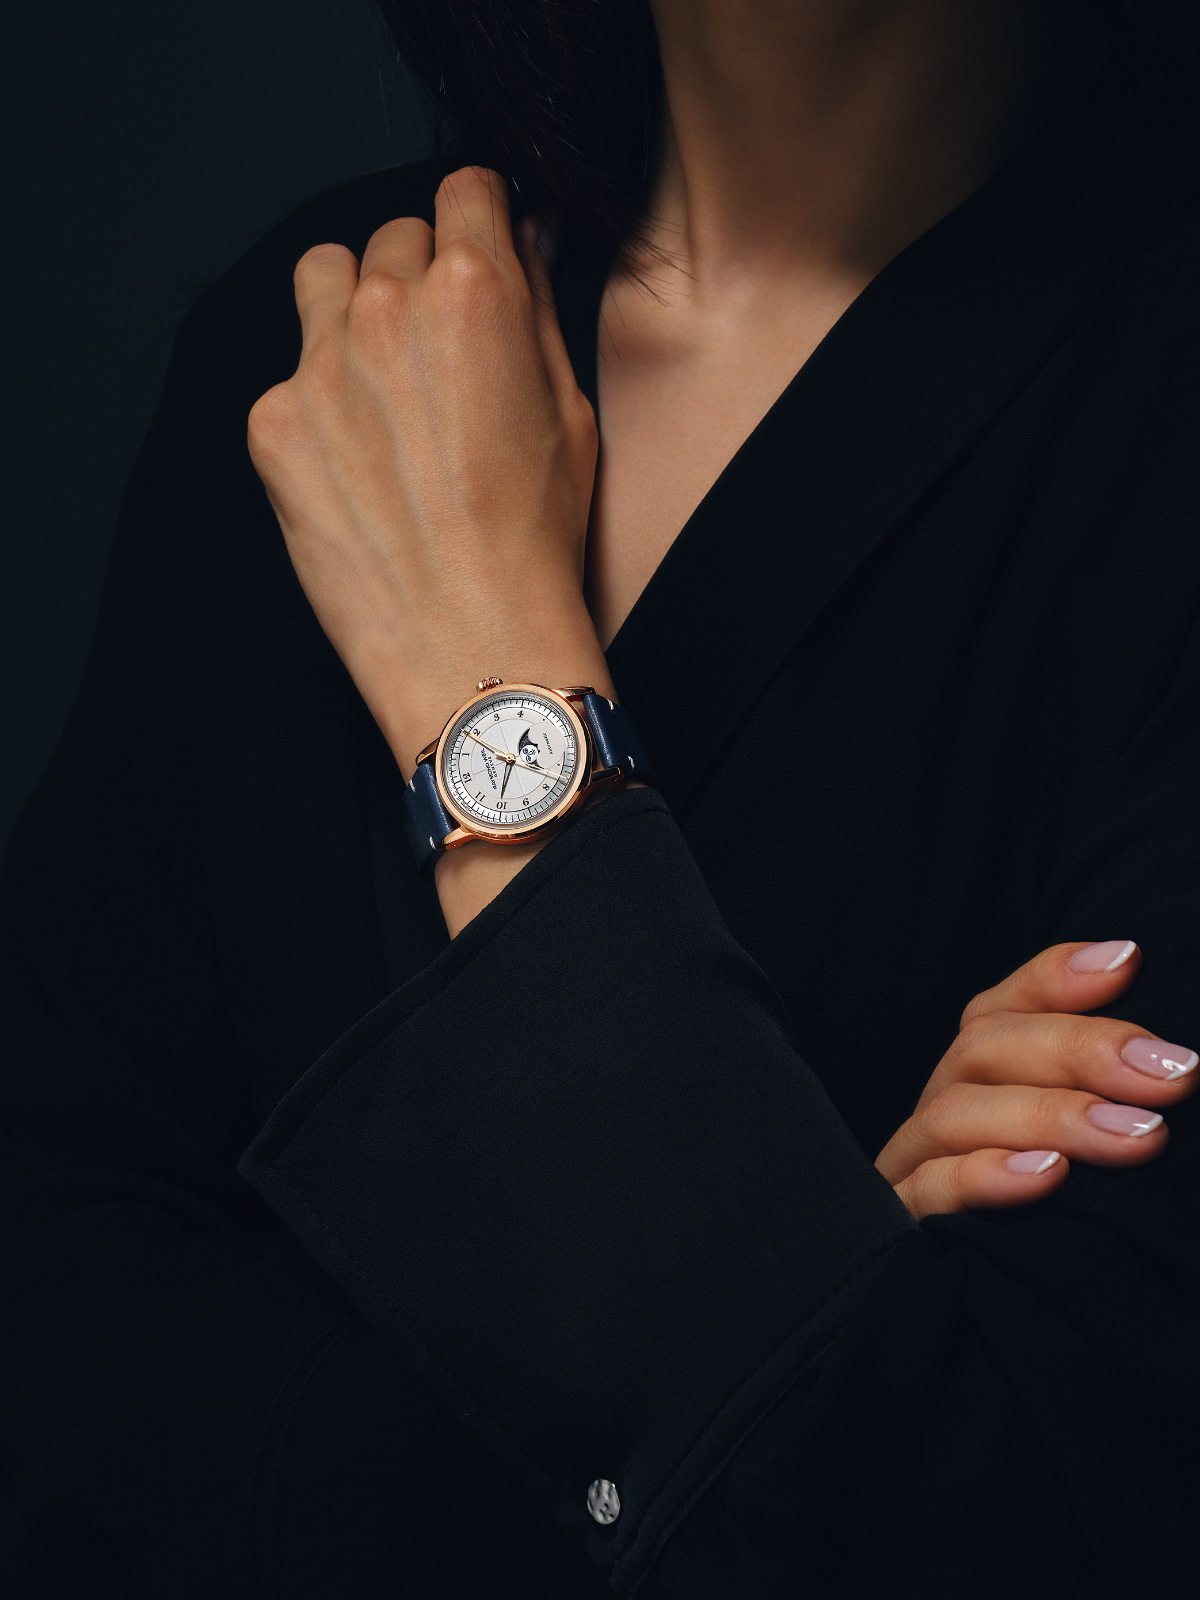 Raymond Weil Presents Its New ‘Millesime’ Watch Collection